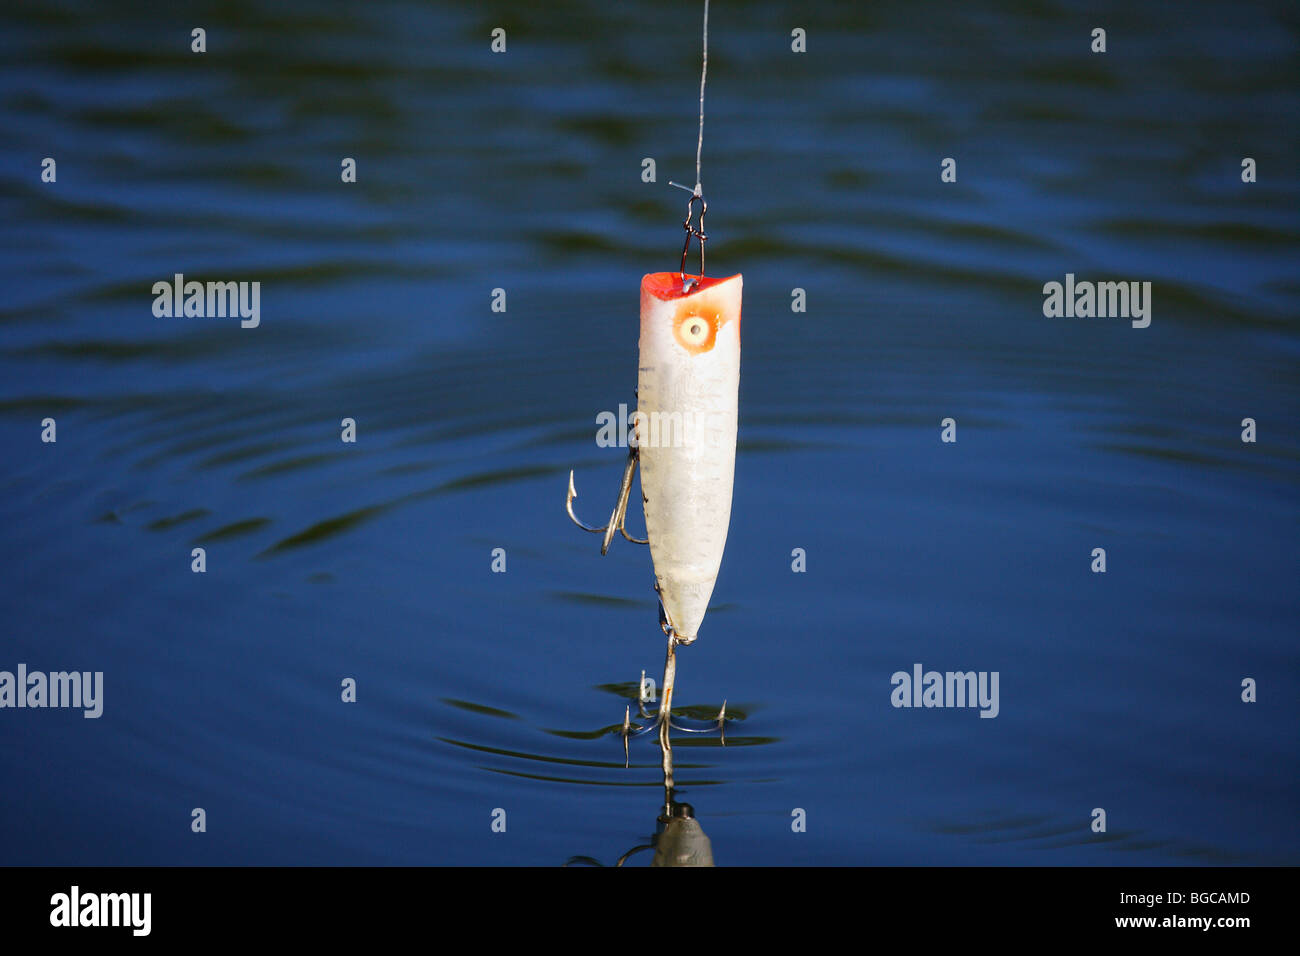 heddon chugger spook XRW 9540 fishing lure being fished on surface of water  large mouth bass lure Stock Photo - Alamy